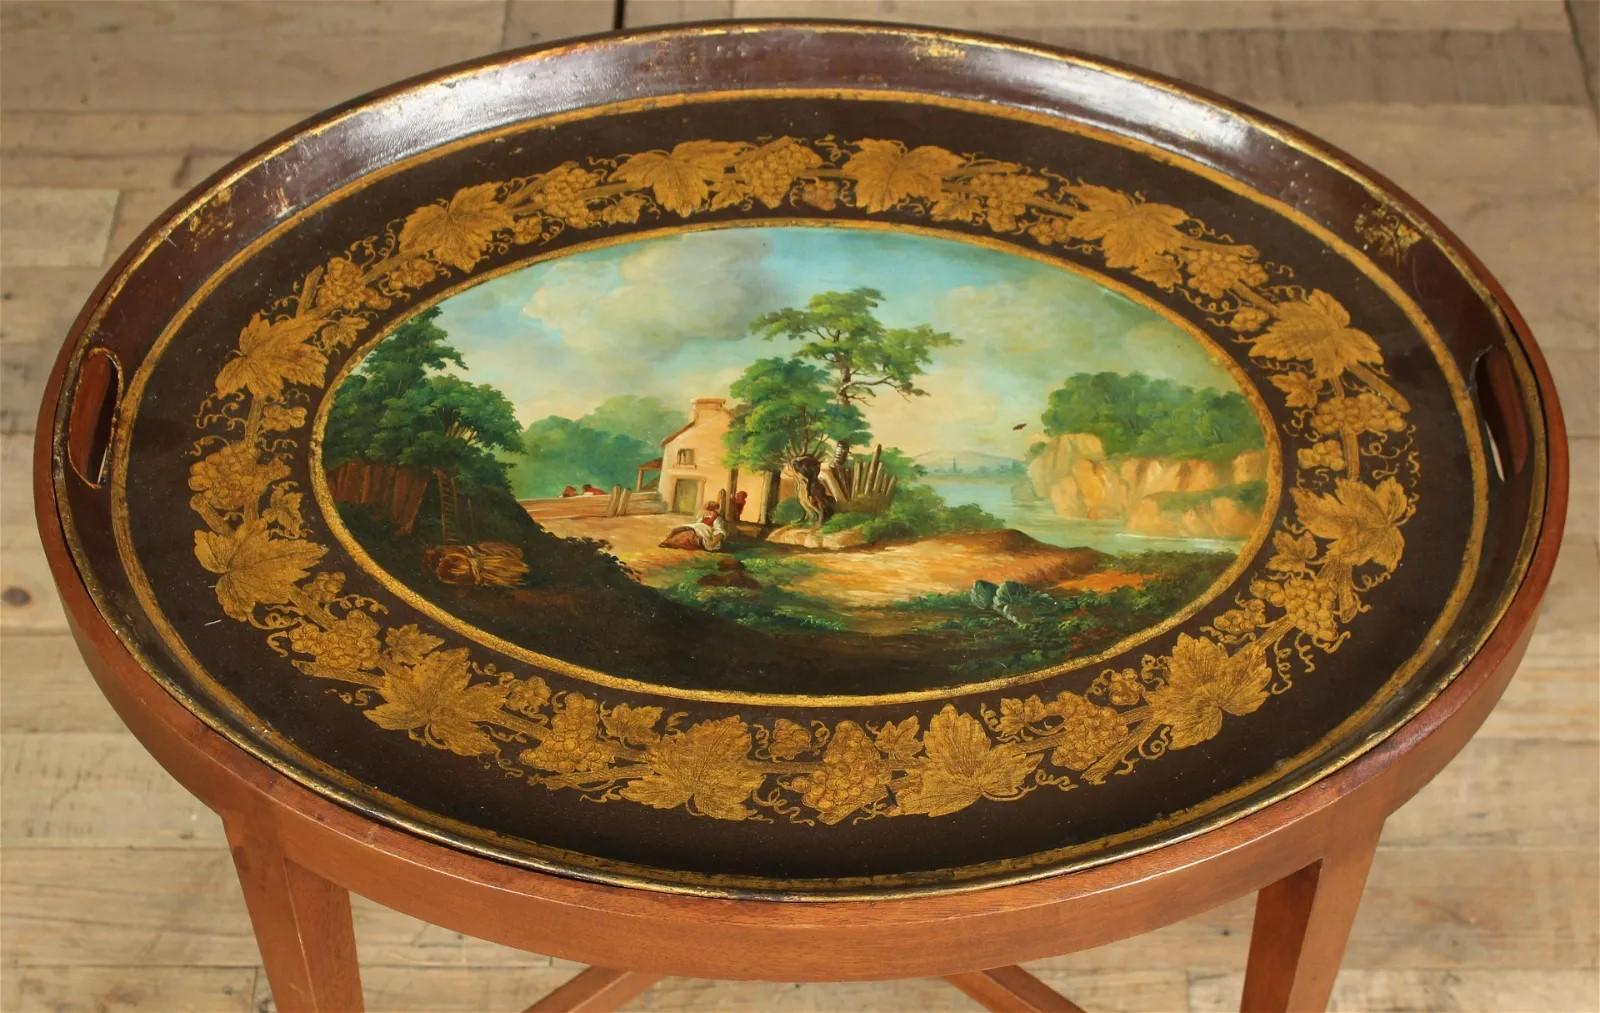 An early 19th century French tole tray, painted with an Idyllic scene in the neoclassical manner, circa 1800. The tray has been fitted to a custom fruitwood base of later manufacture.